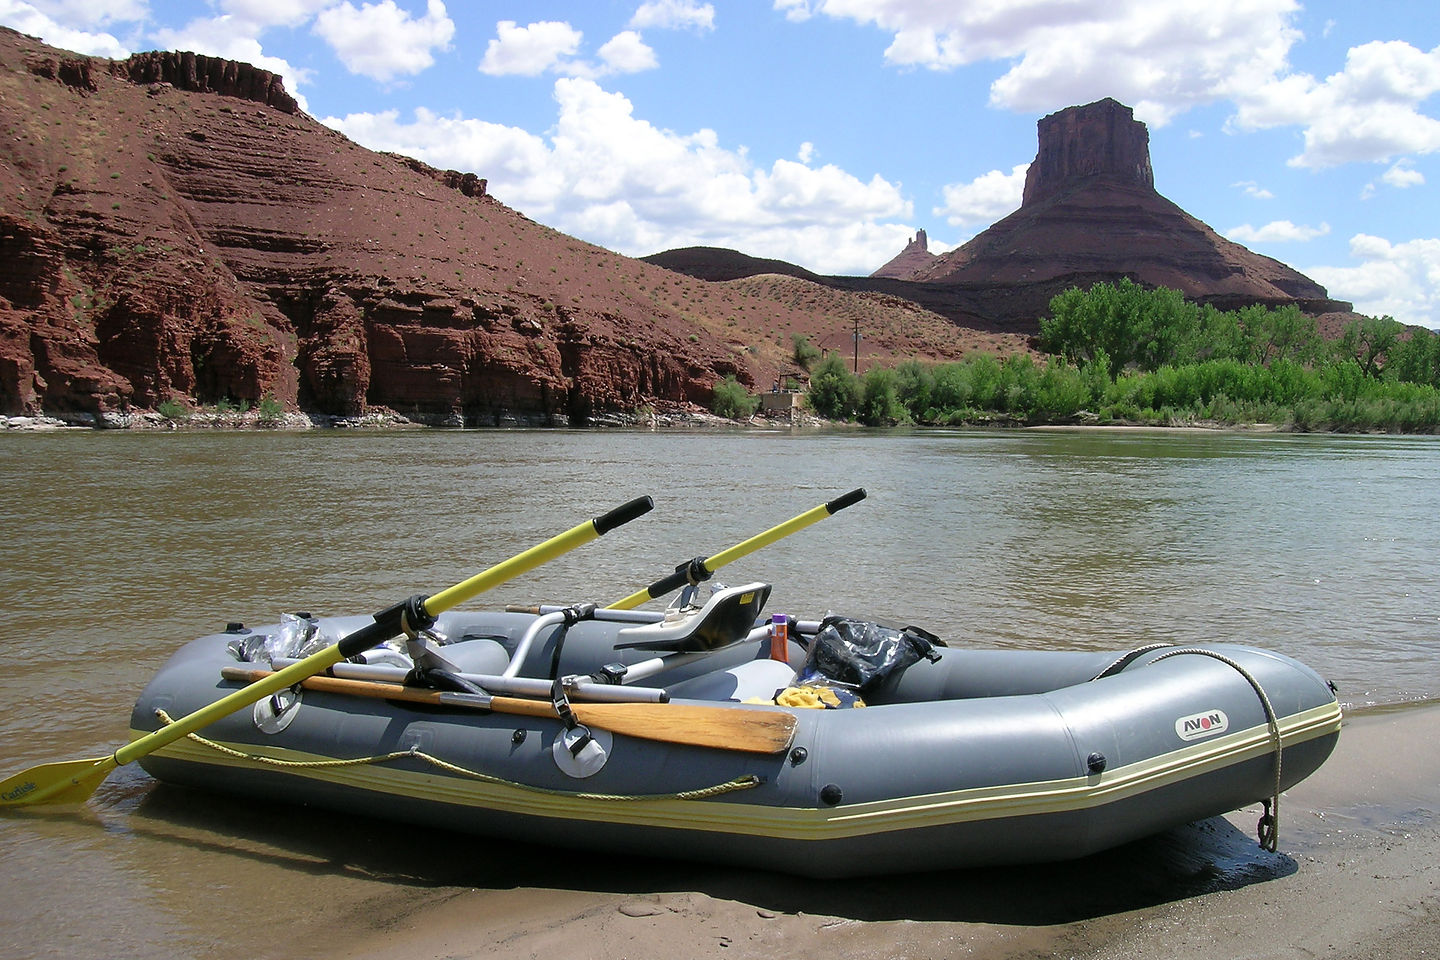 Trusty Avon inflatable on the Colorado River